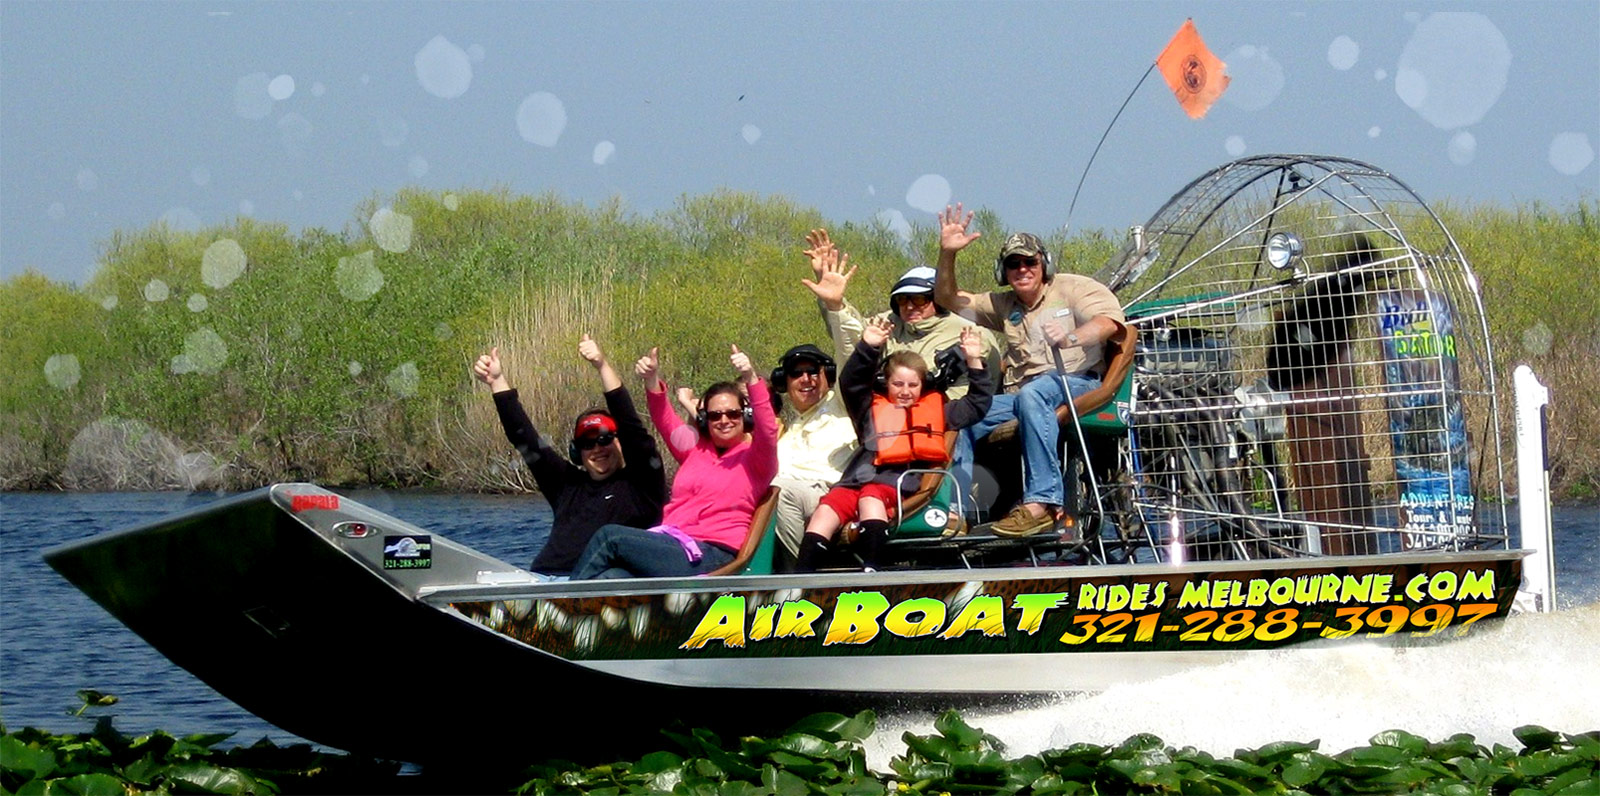 Airboat Rides Melbourne